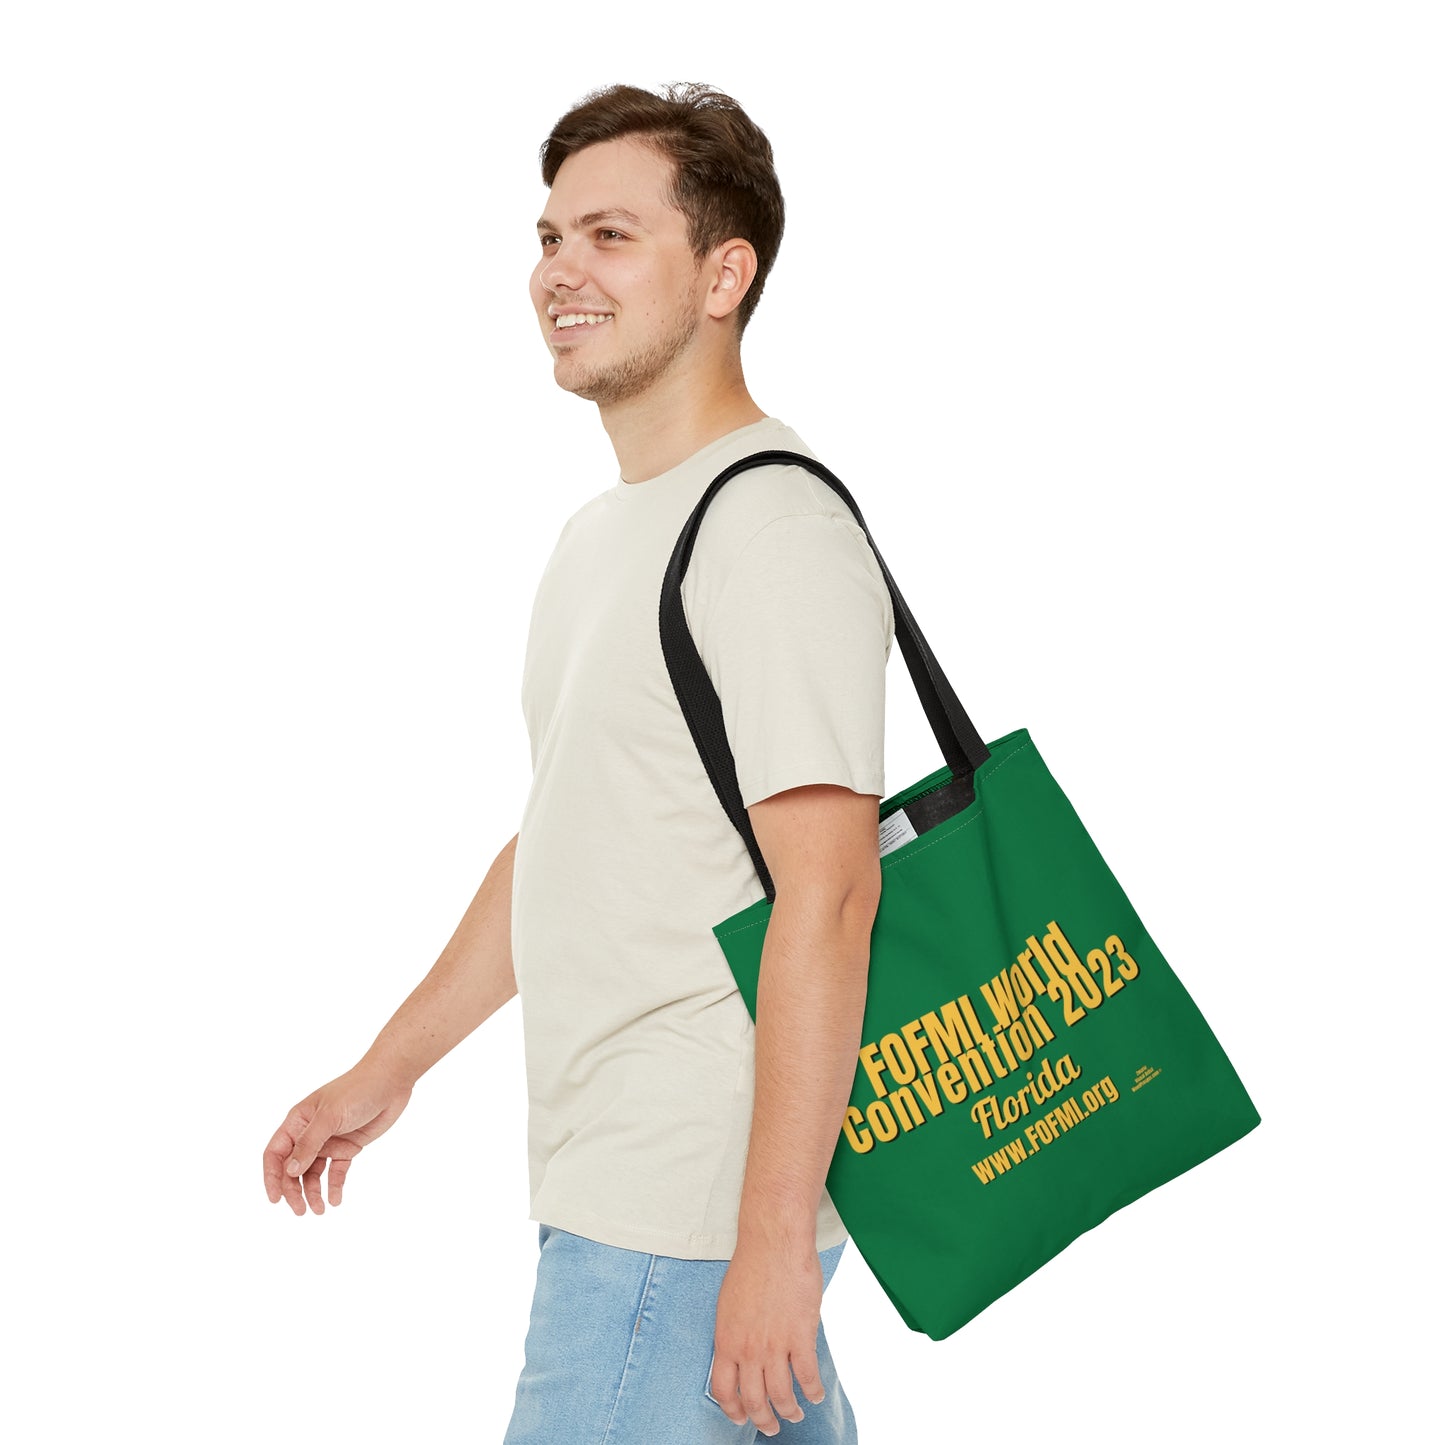 FOFMI WORLD CONVENTION 2023 Tote Bag (Green)